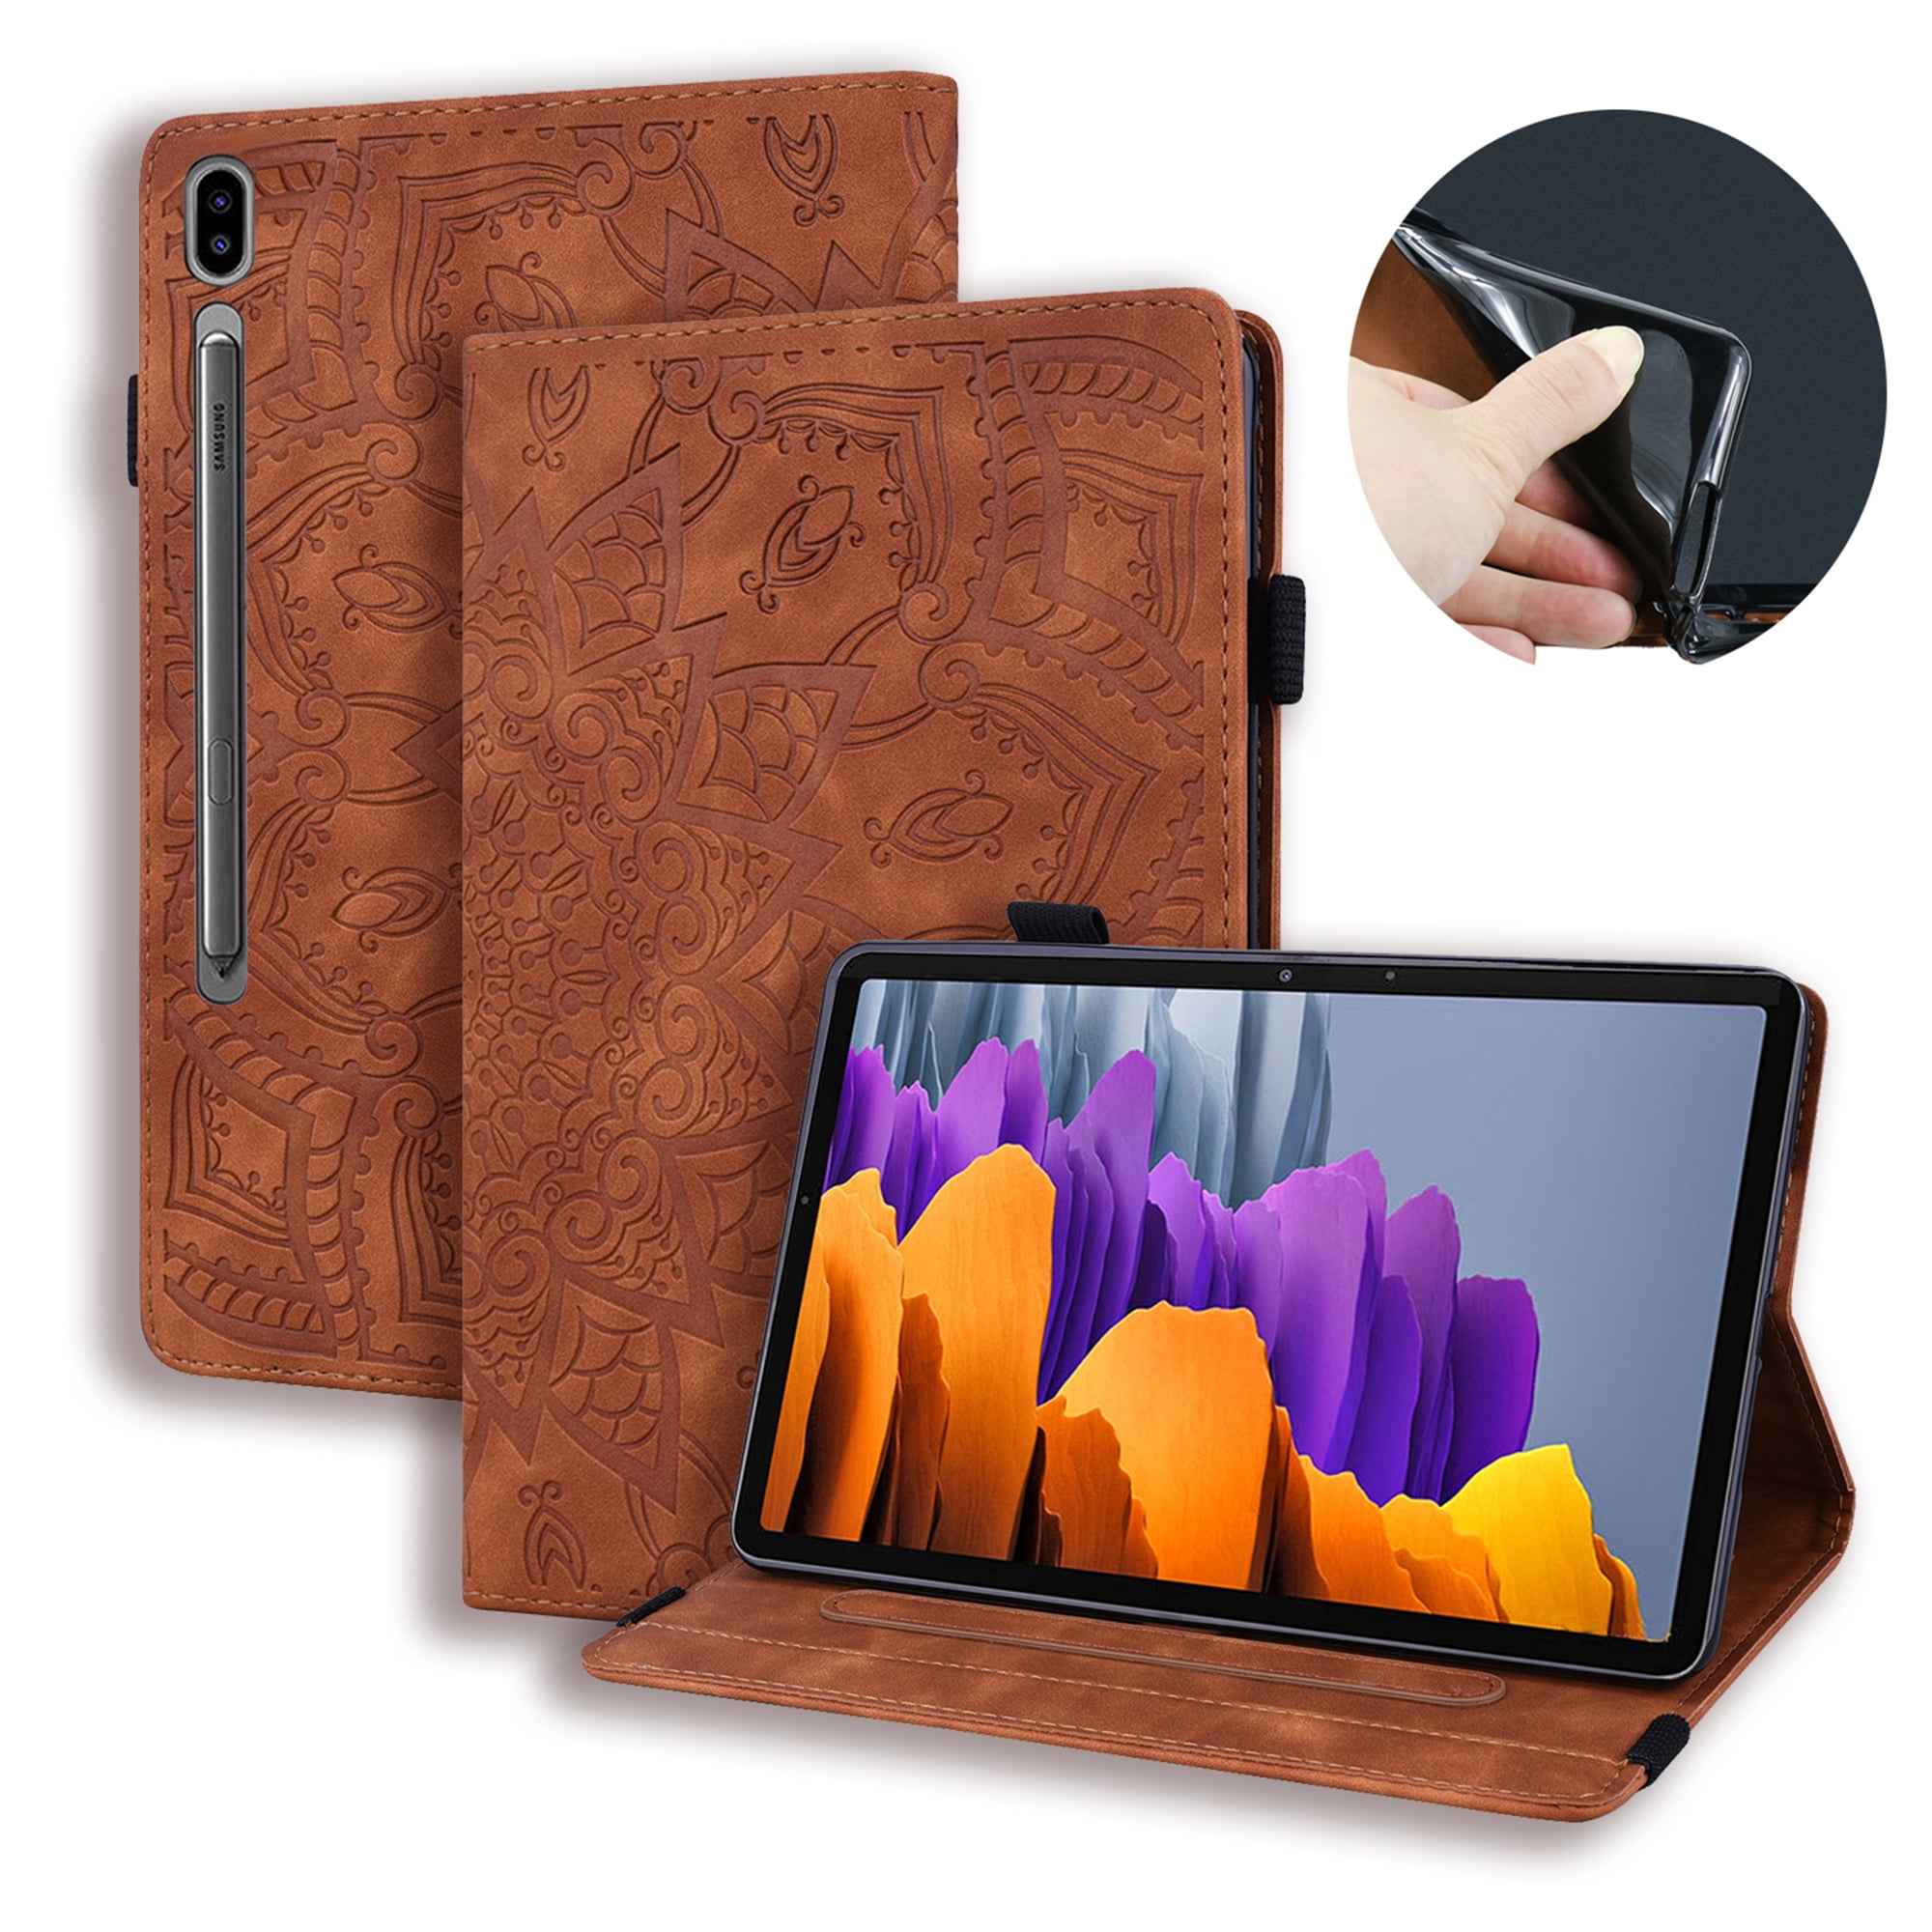 Galaxy Tab S7 Case, Dteck Muiltangle Standing Embossed PU Leather Folio Flip Stand Case with